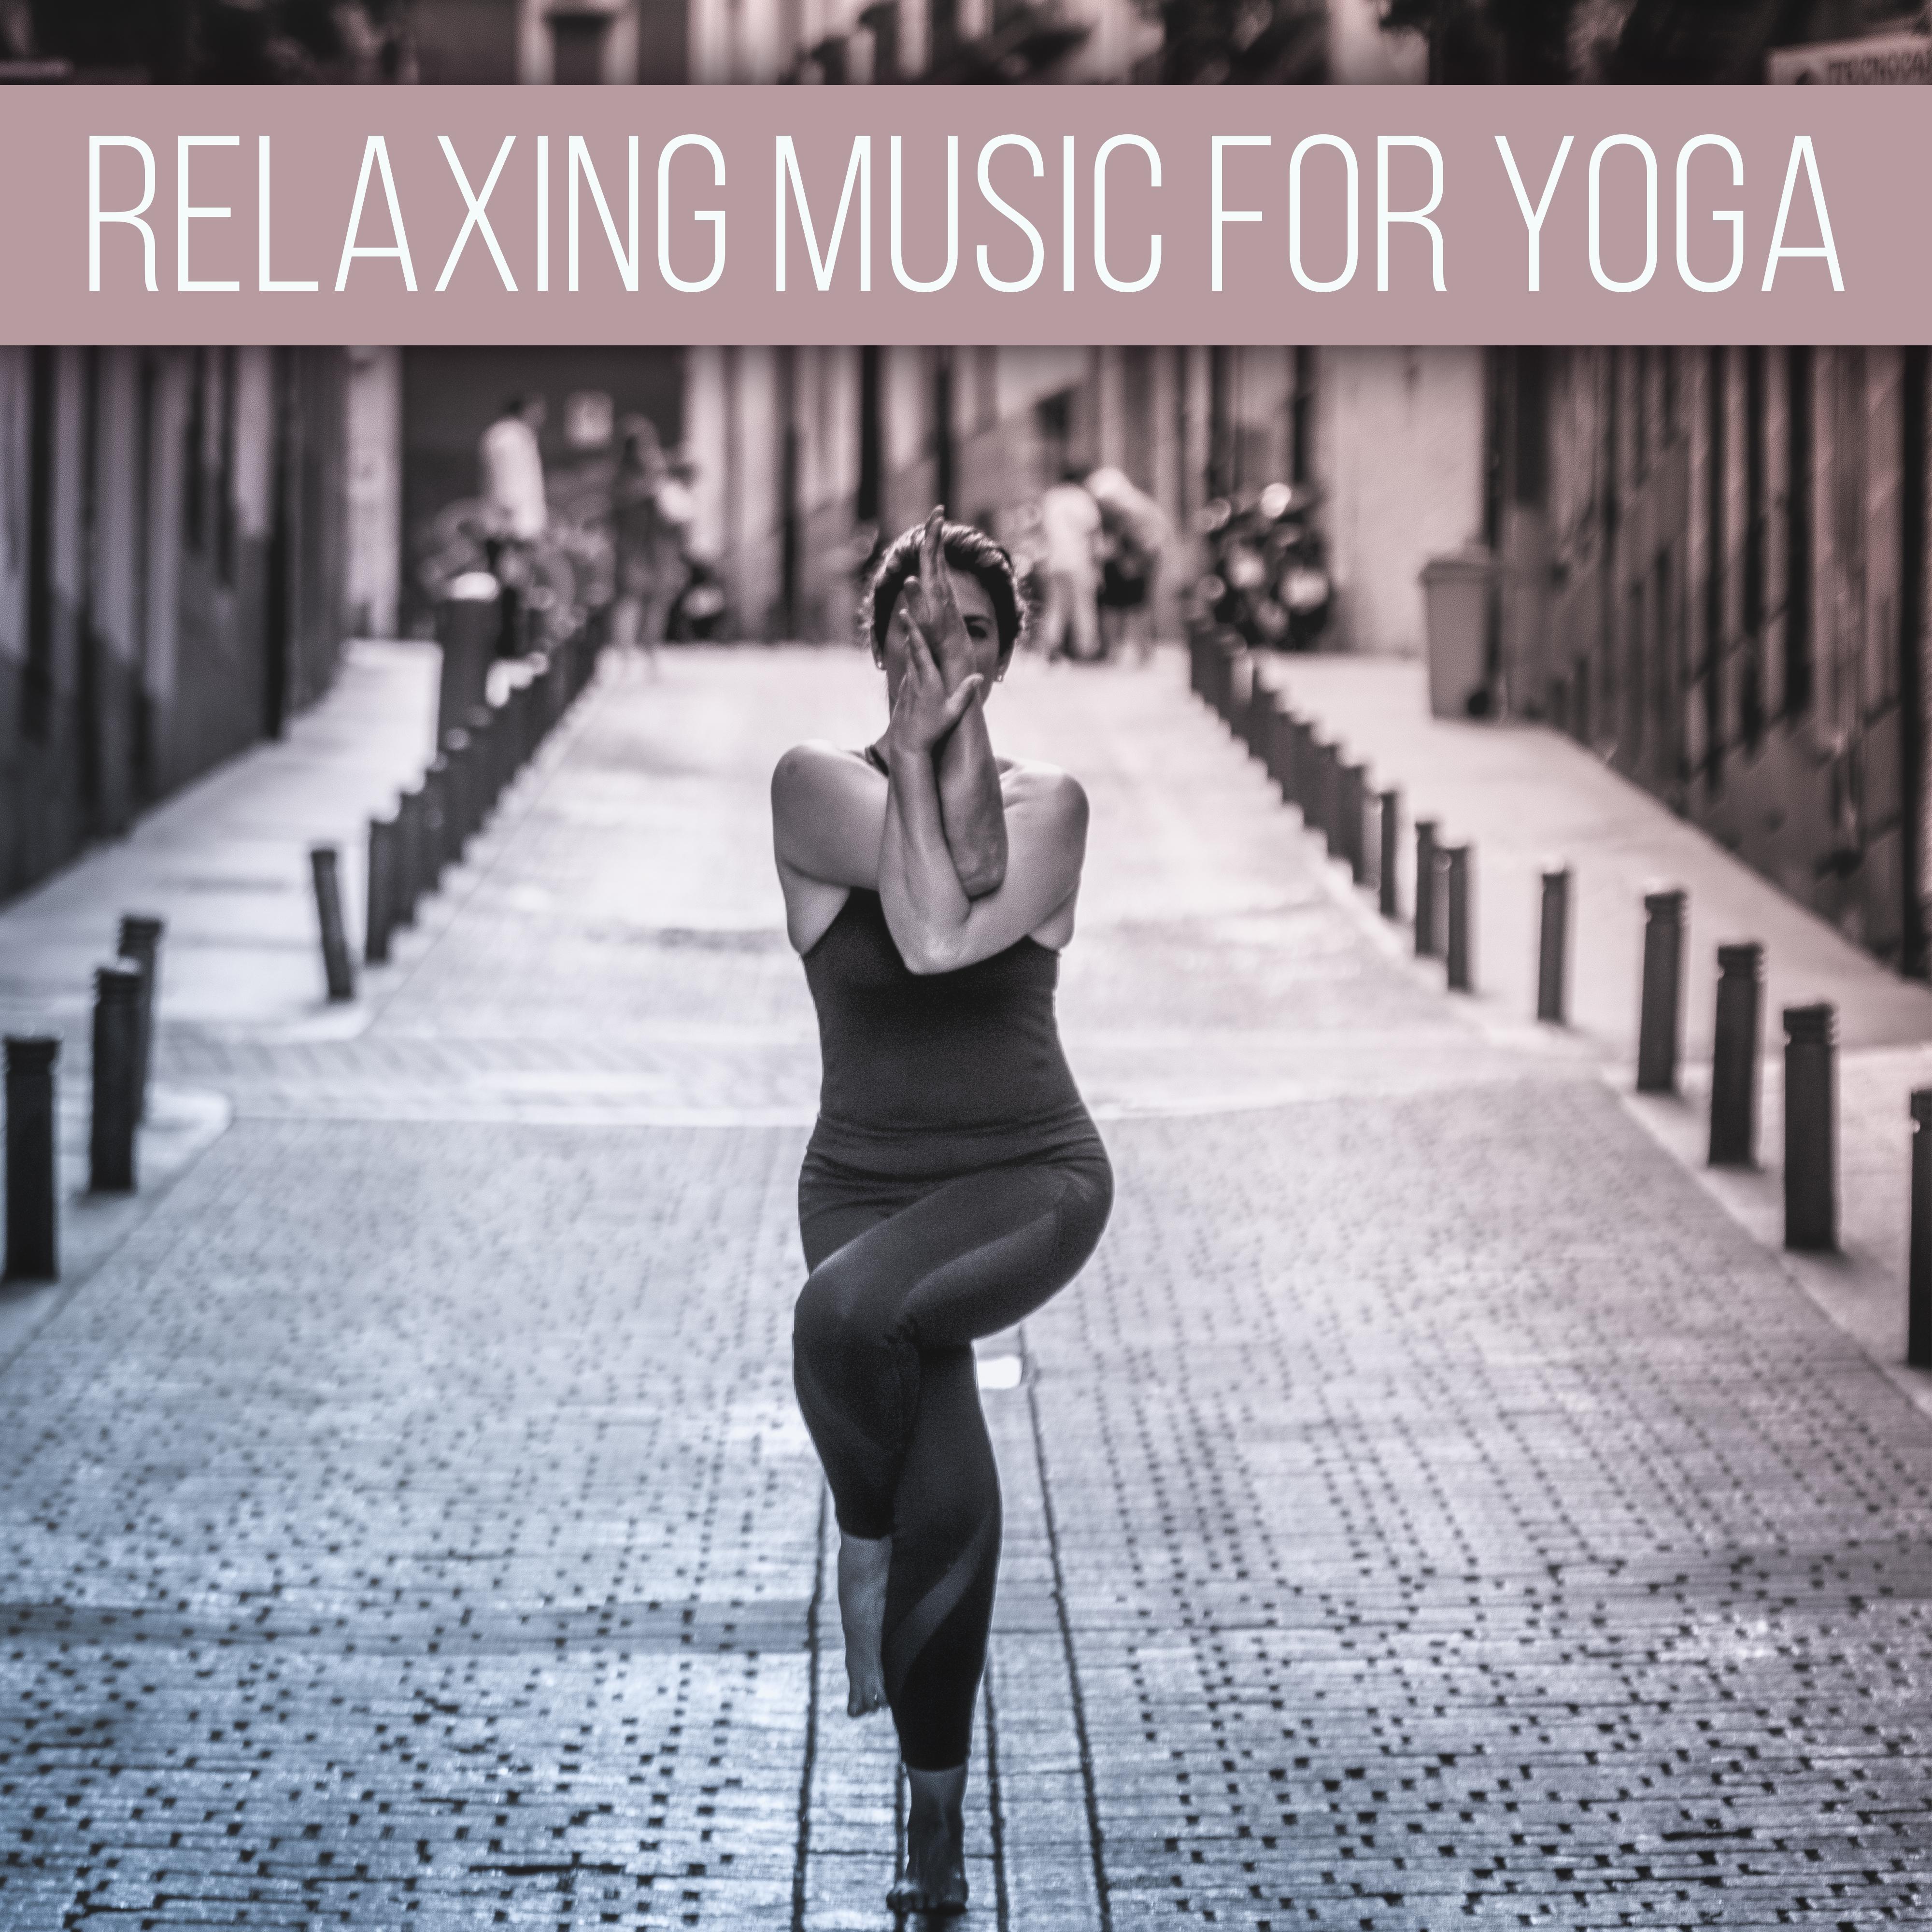 Relaxing Music for Yoga – Morning Meditation, Zen, Reiki Sounds, Mantra, Harmony & Concentration, Relax for Mind